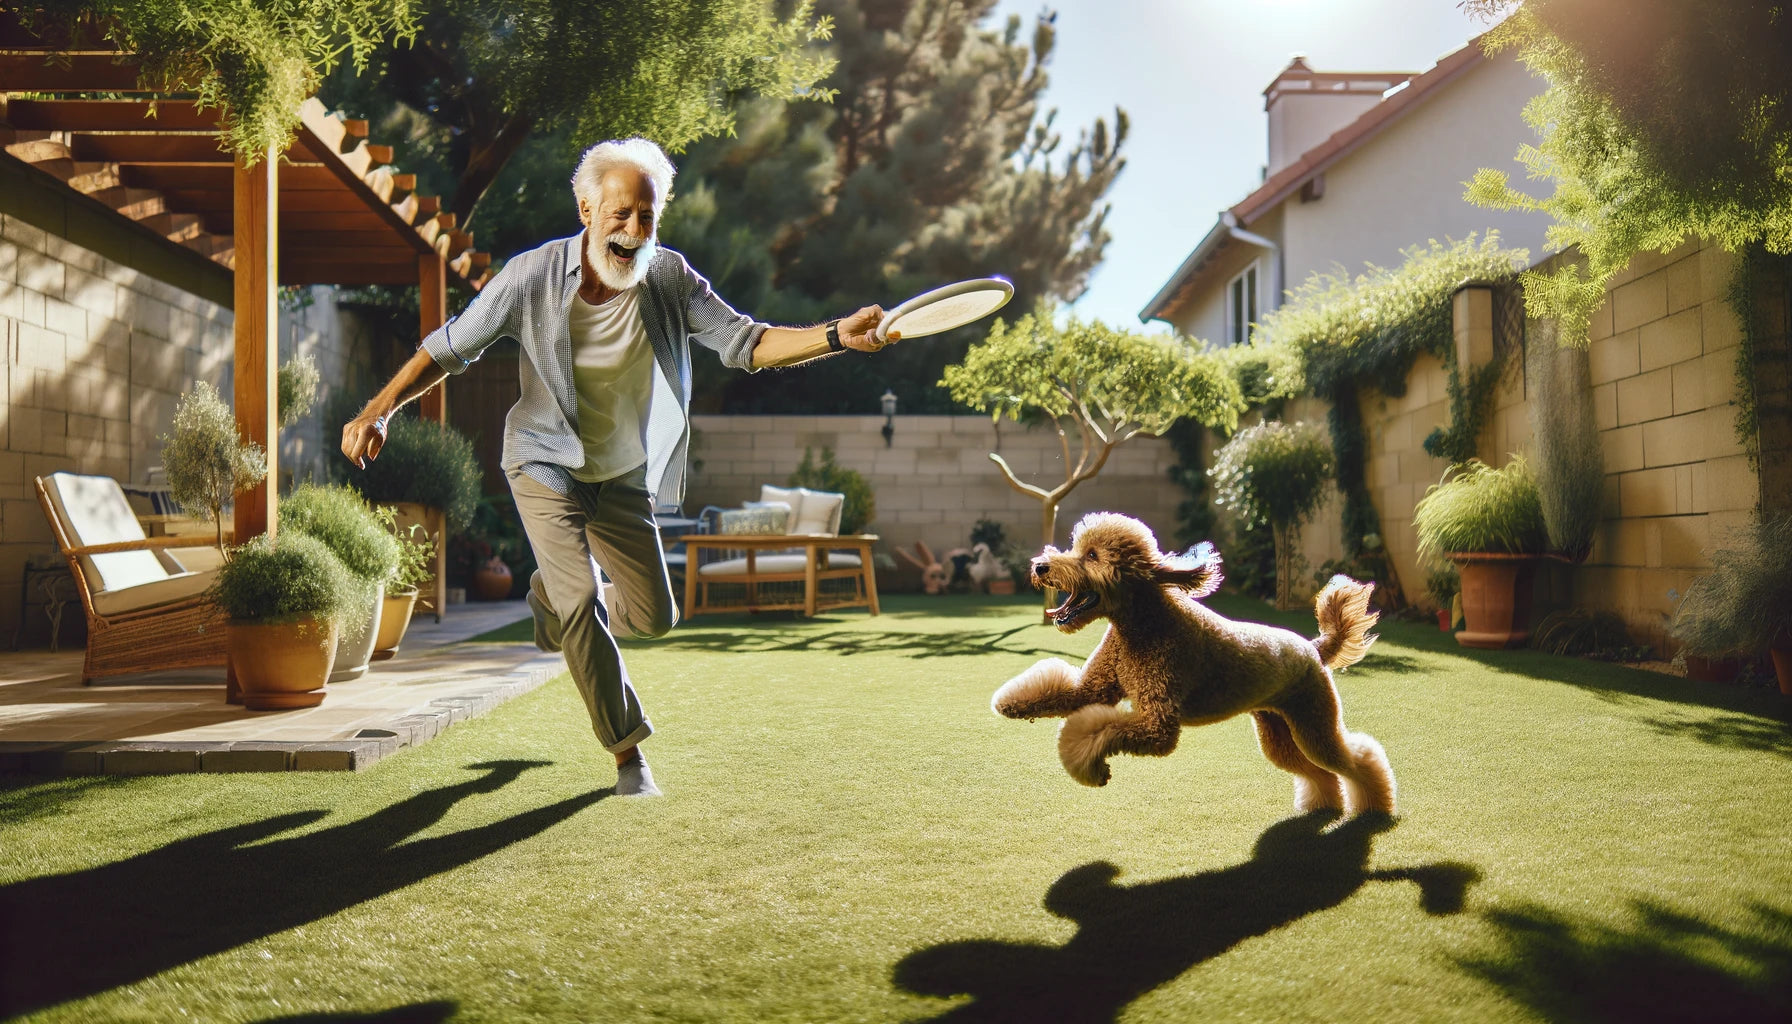 Candid moment of laughter between a Baby Boomer and their Mini Goldendoodle during a playful backyard game, capturing the pure joy of pet ownership.